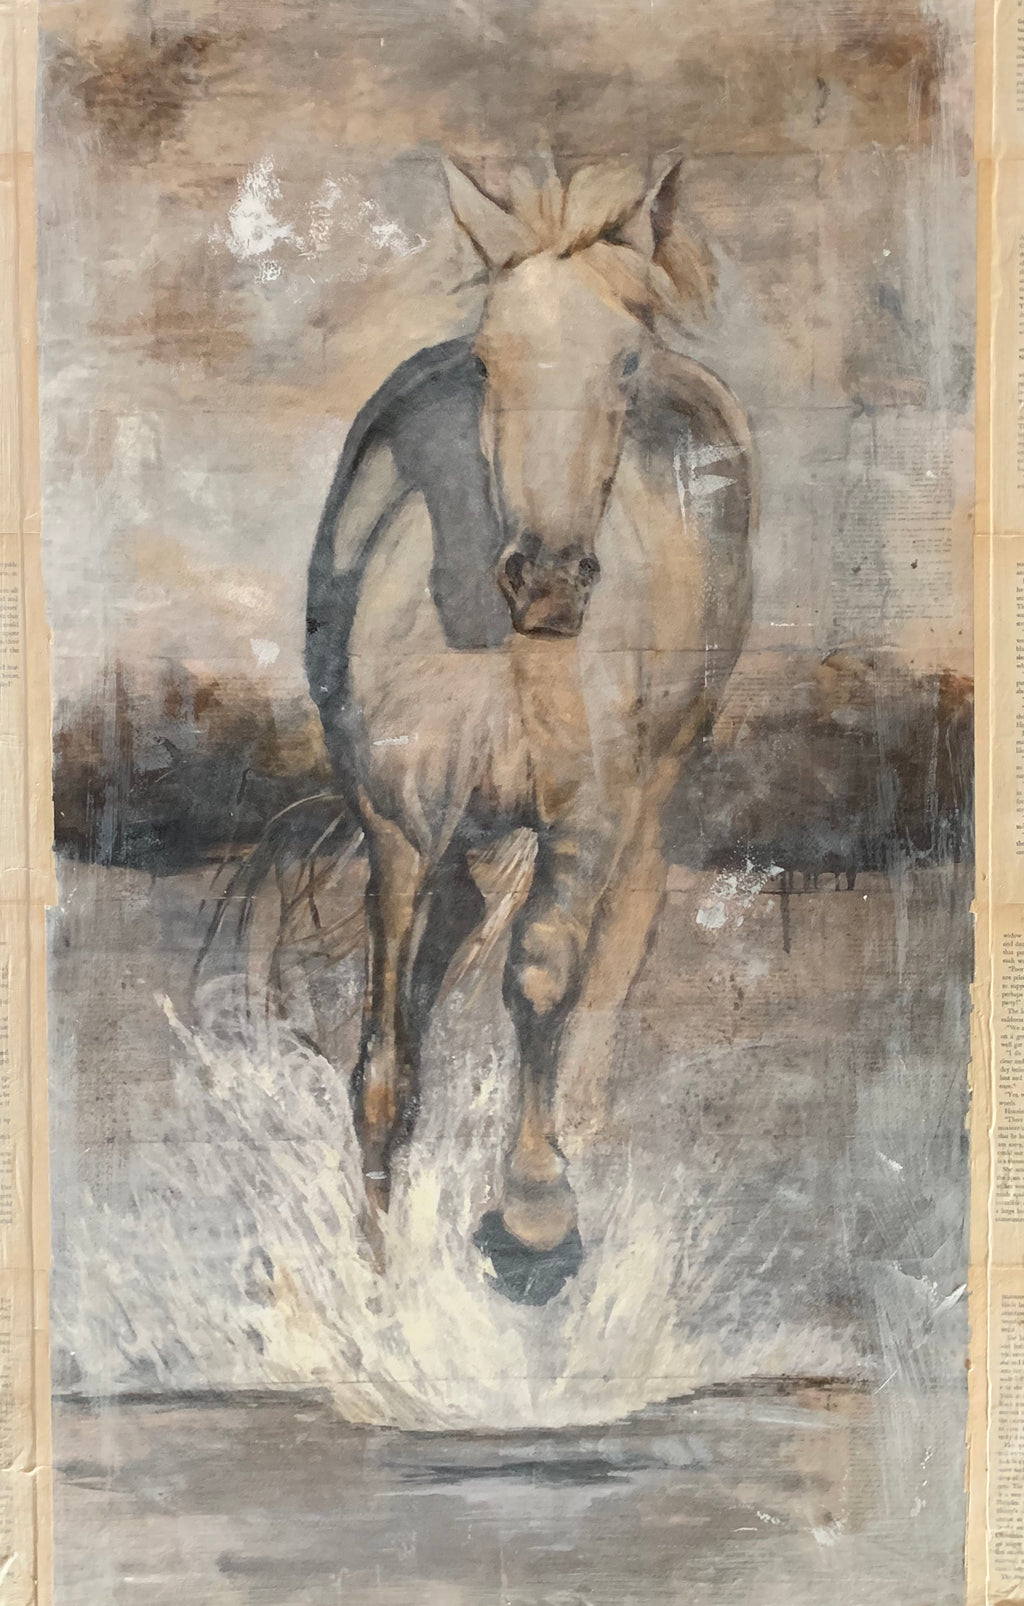 Original retouched print of energetic horse from the Camargue region of France in subtle neutrals of cool and warm tones of gray. A showpiece for any wall in your home or office.